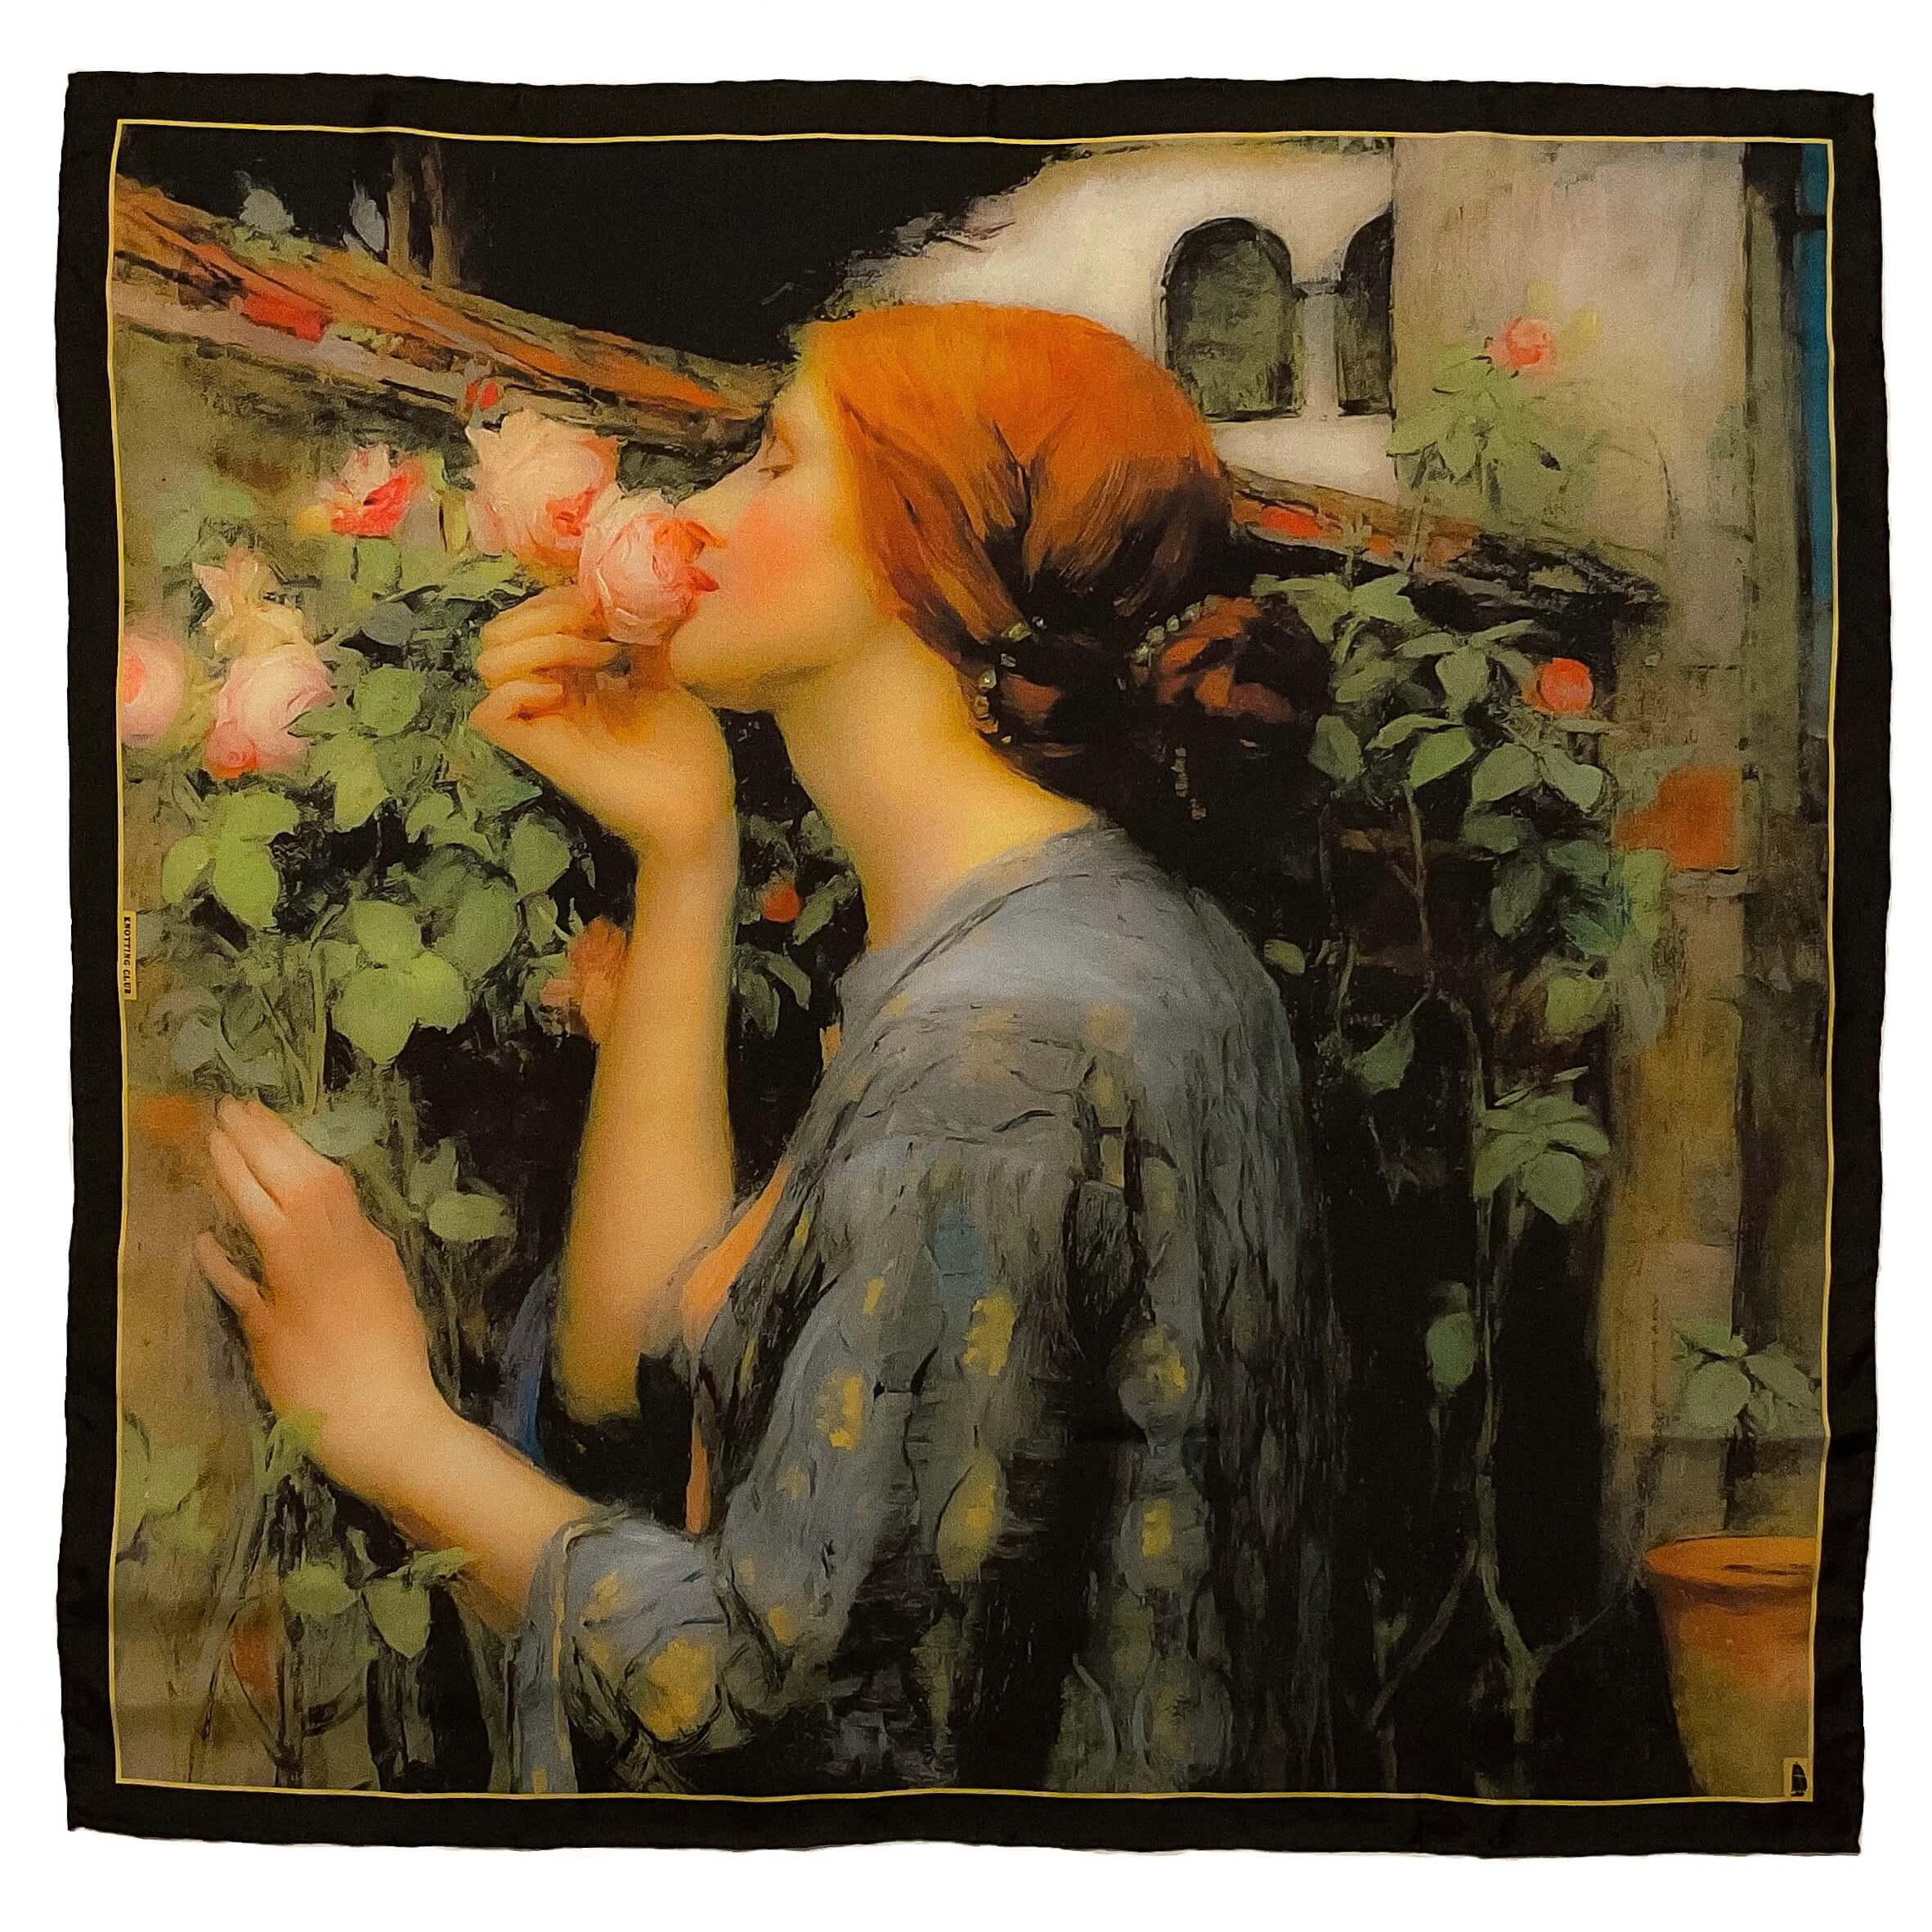 Historical fine-art silk scarf with a print of the The Soul of the Rose painting by John William Waterhouse 1908